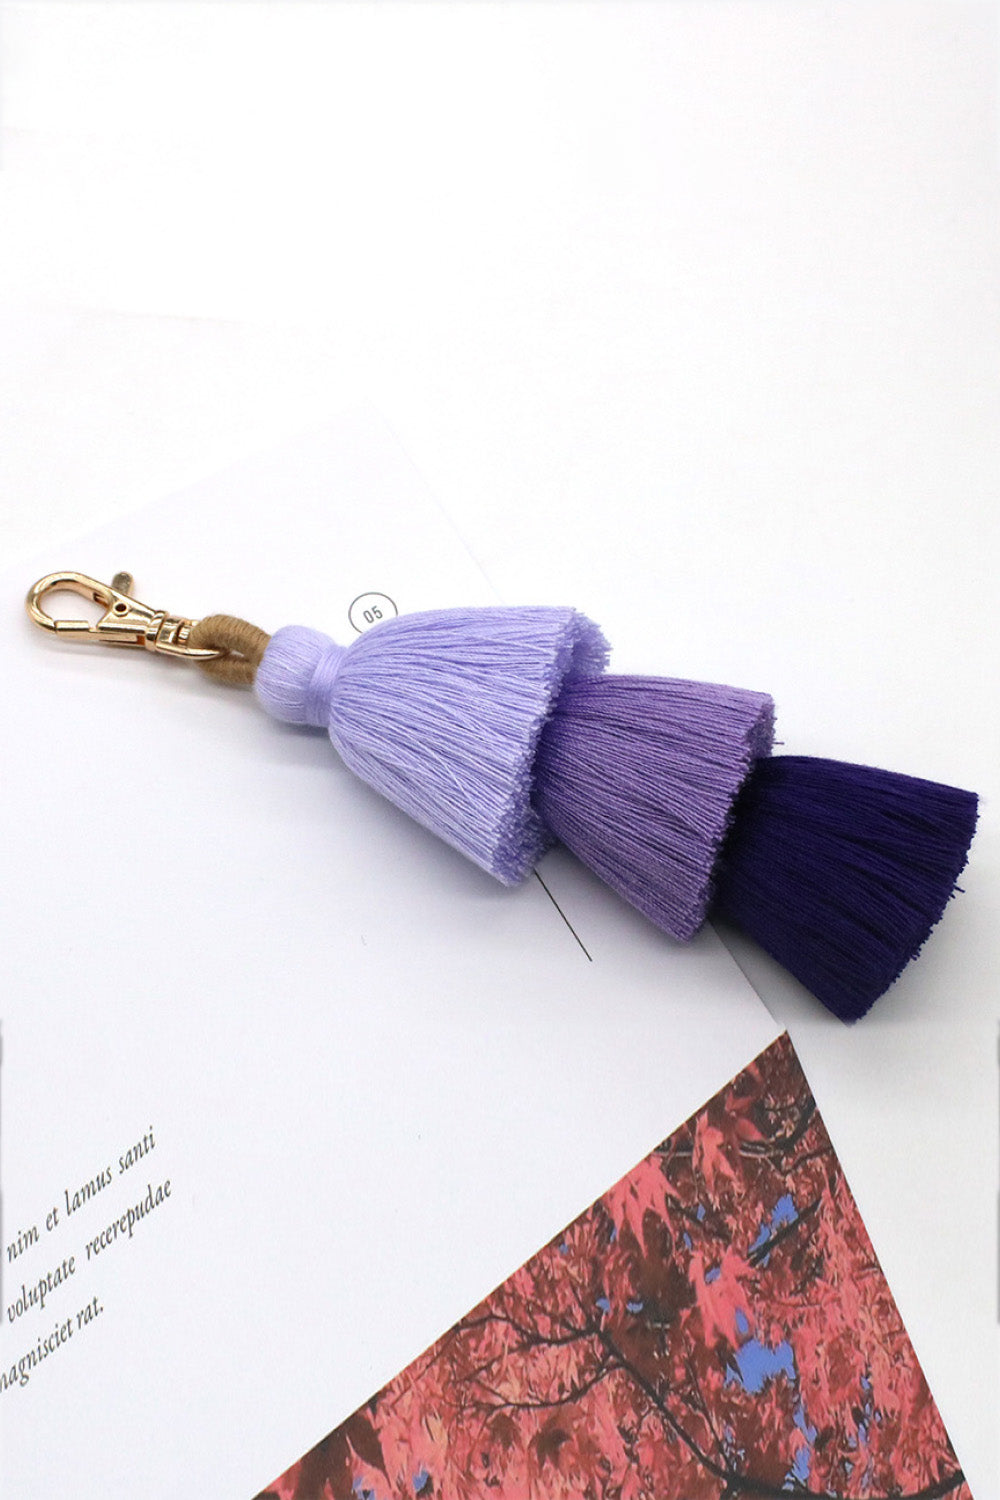 Trendsi Cupid Beauty Supplies Purple / One Size Keychains 4-Pack Multicolored Fringe Keychain, Color Varies